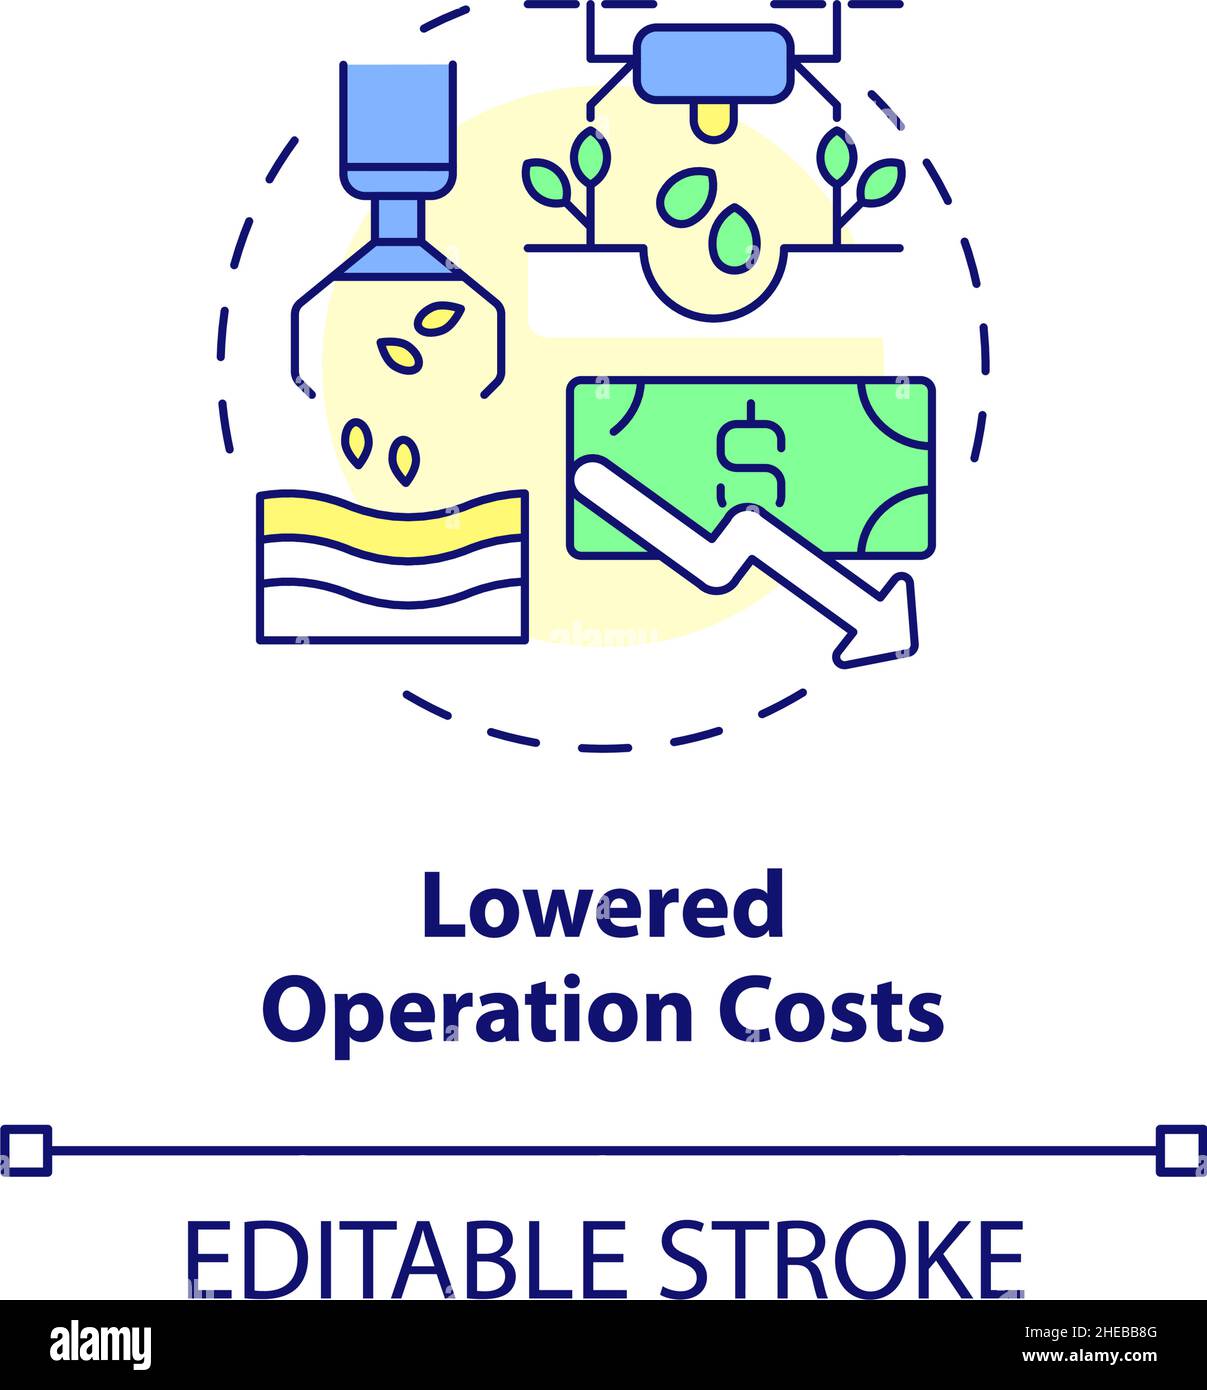 Lowered operation costs concept icon Stock Vector